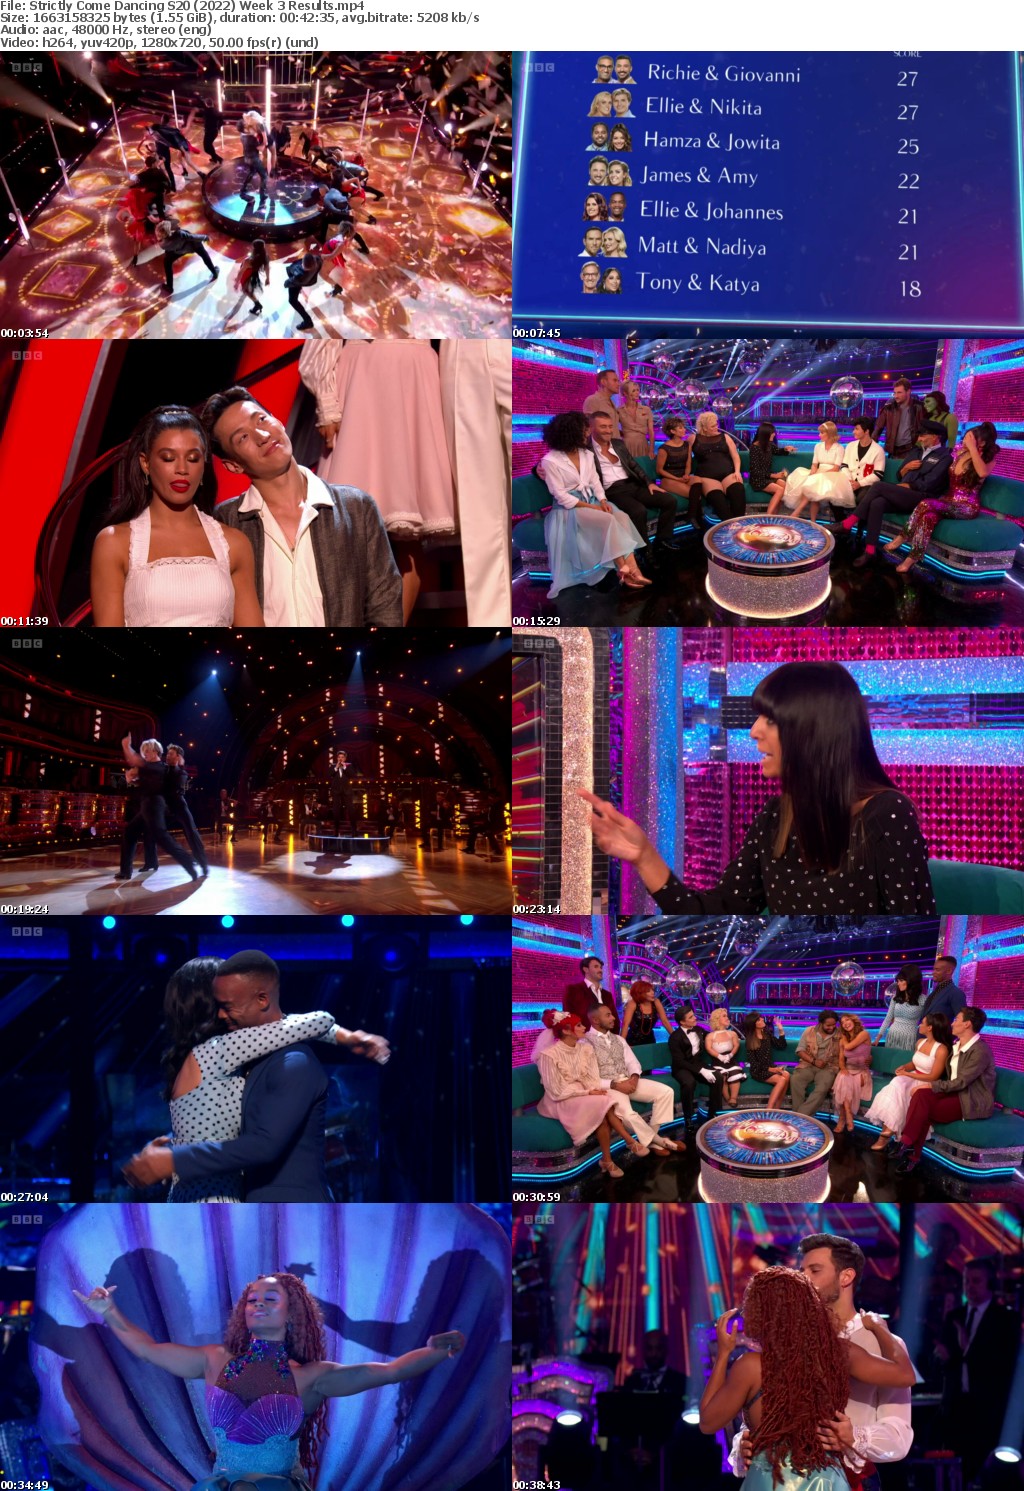 Strictly Come Dancing S20 (2022) Week 3 Results (1280x720p HD, 50fps, soft Eng subs)